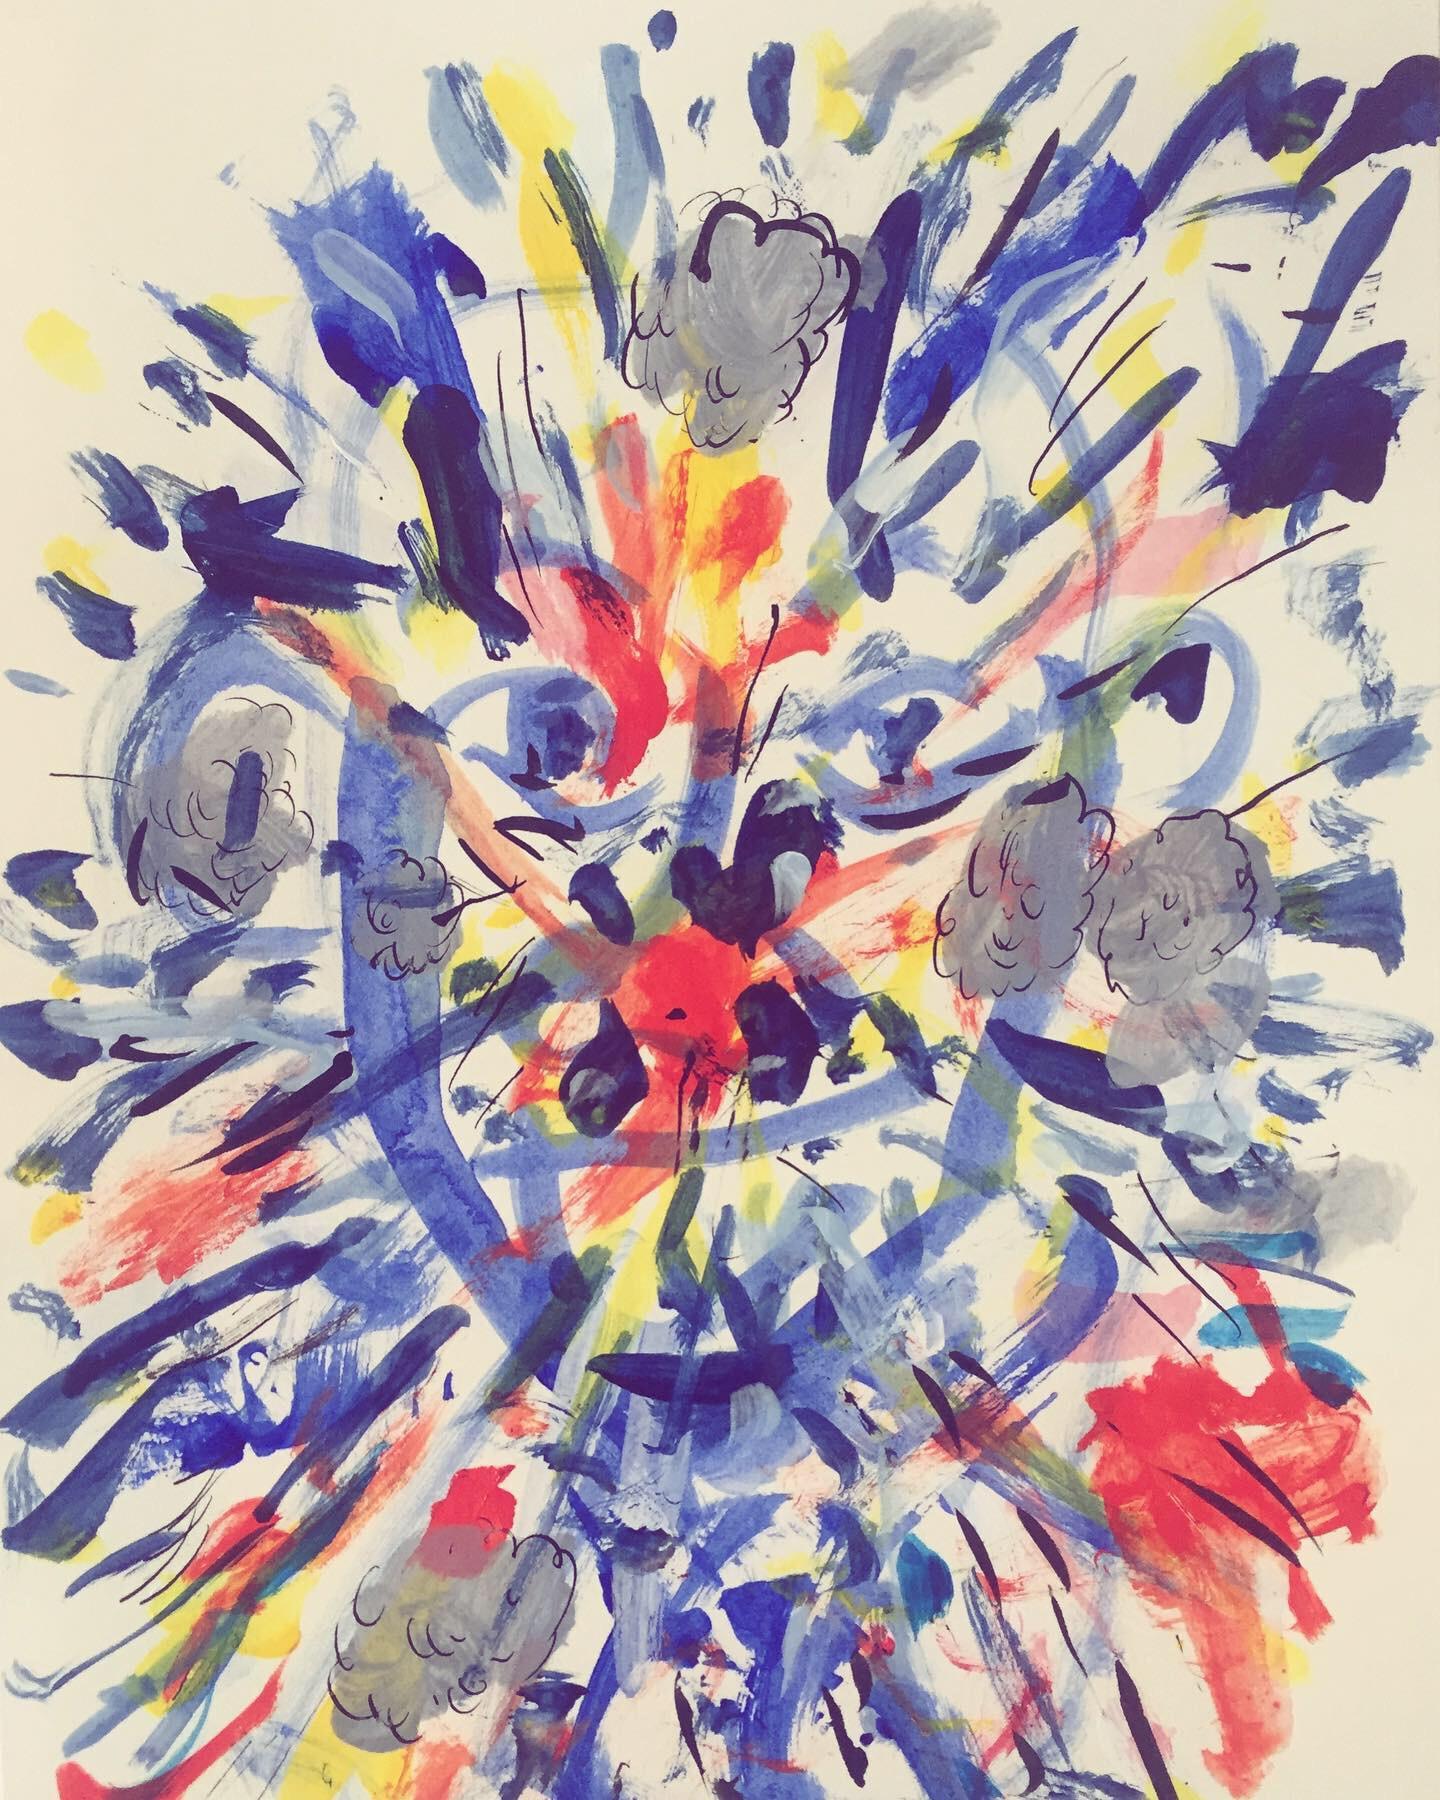 Nina Bovasso Abstract Drawing - Face Explosion 4  (4 of 4 suite) 9x12 inches on paper